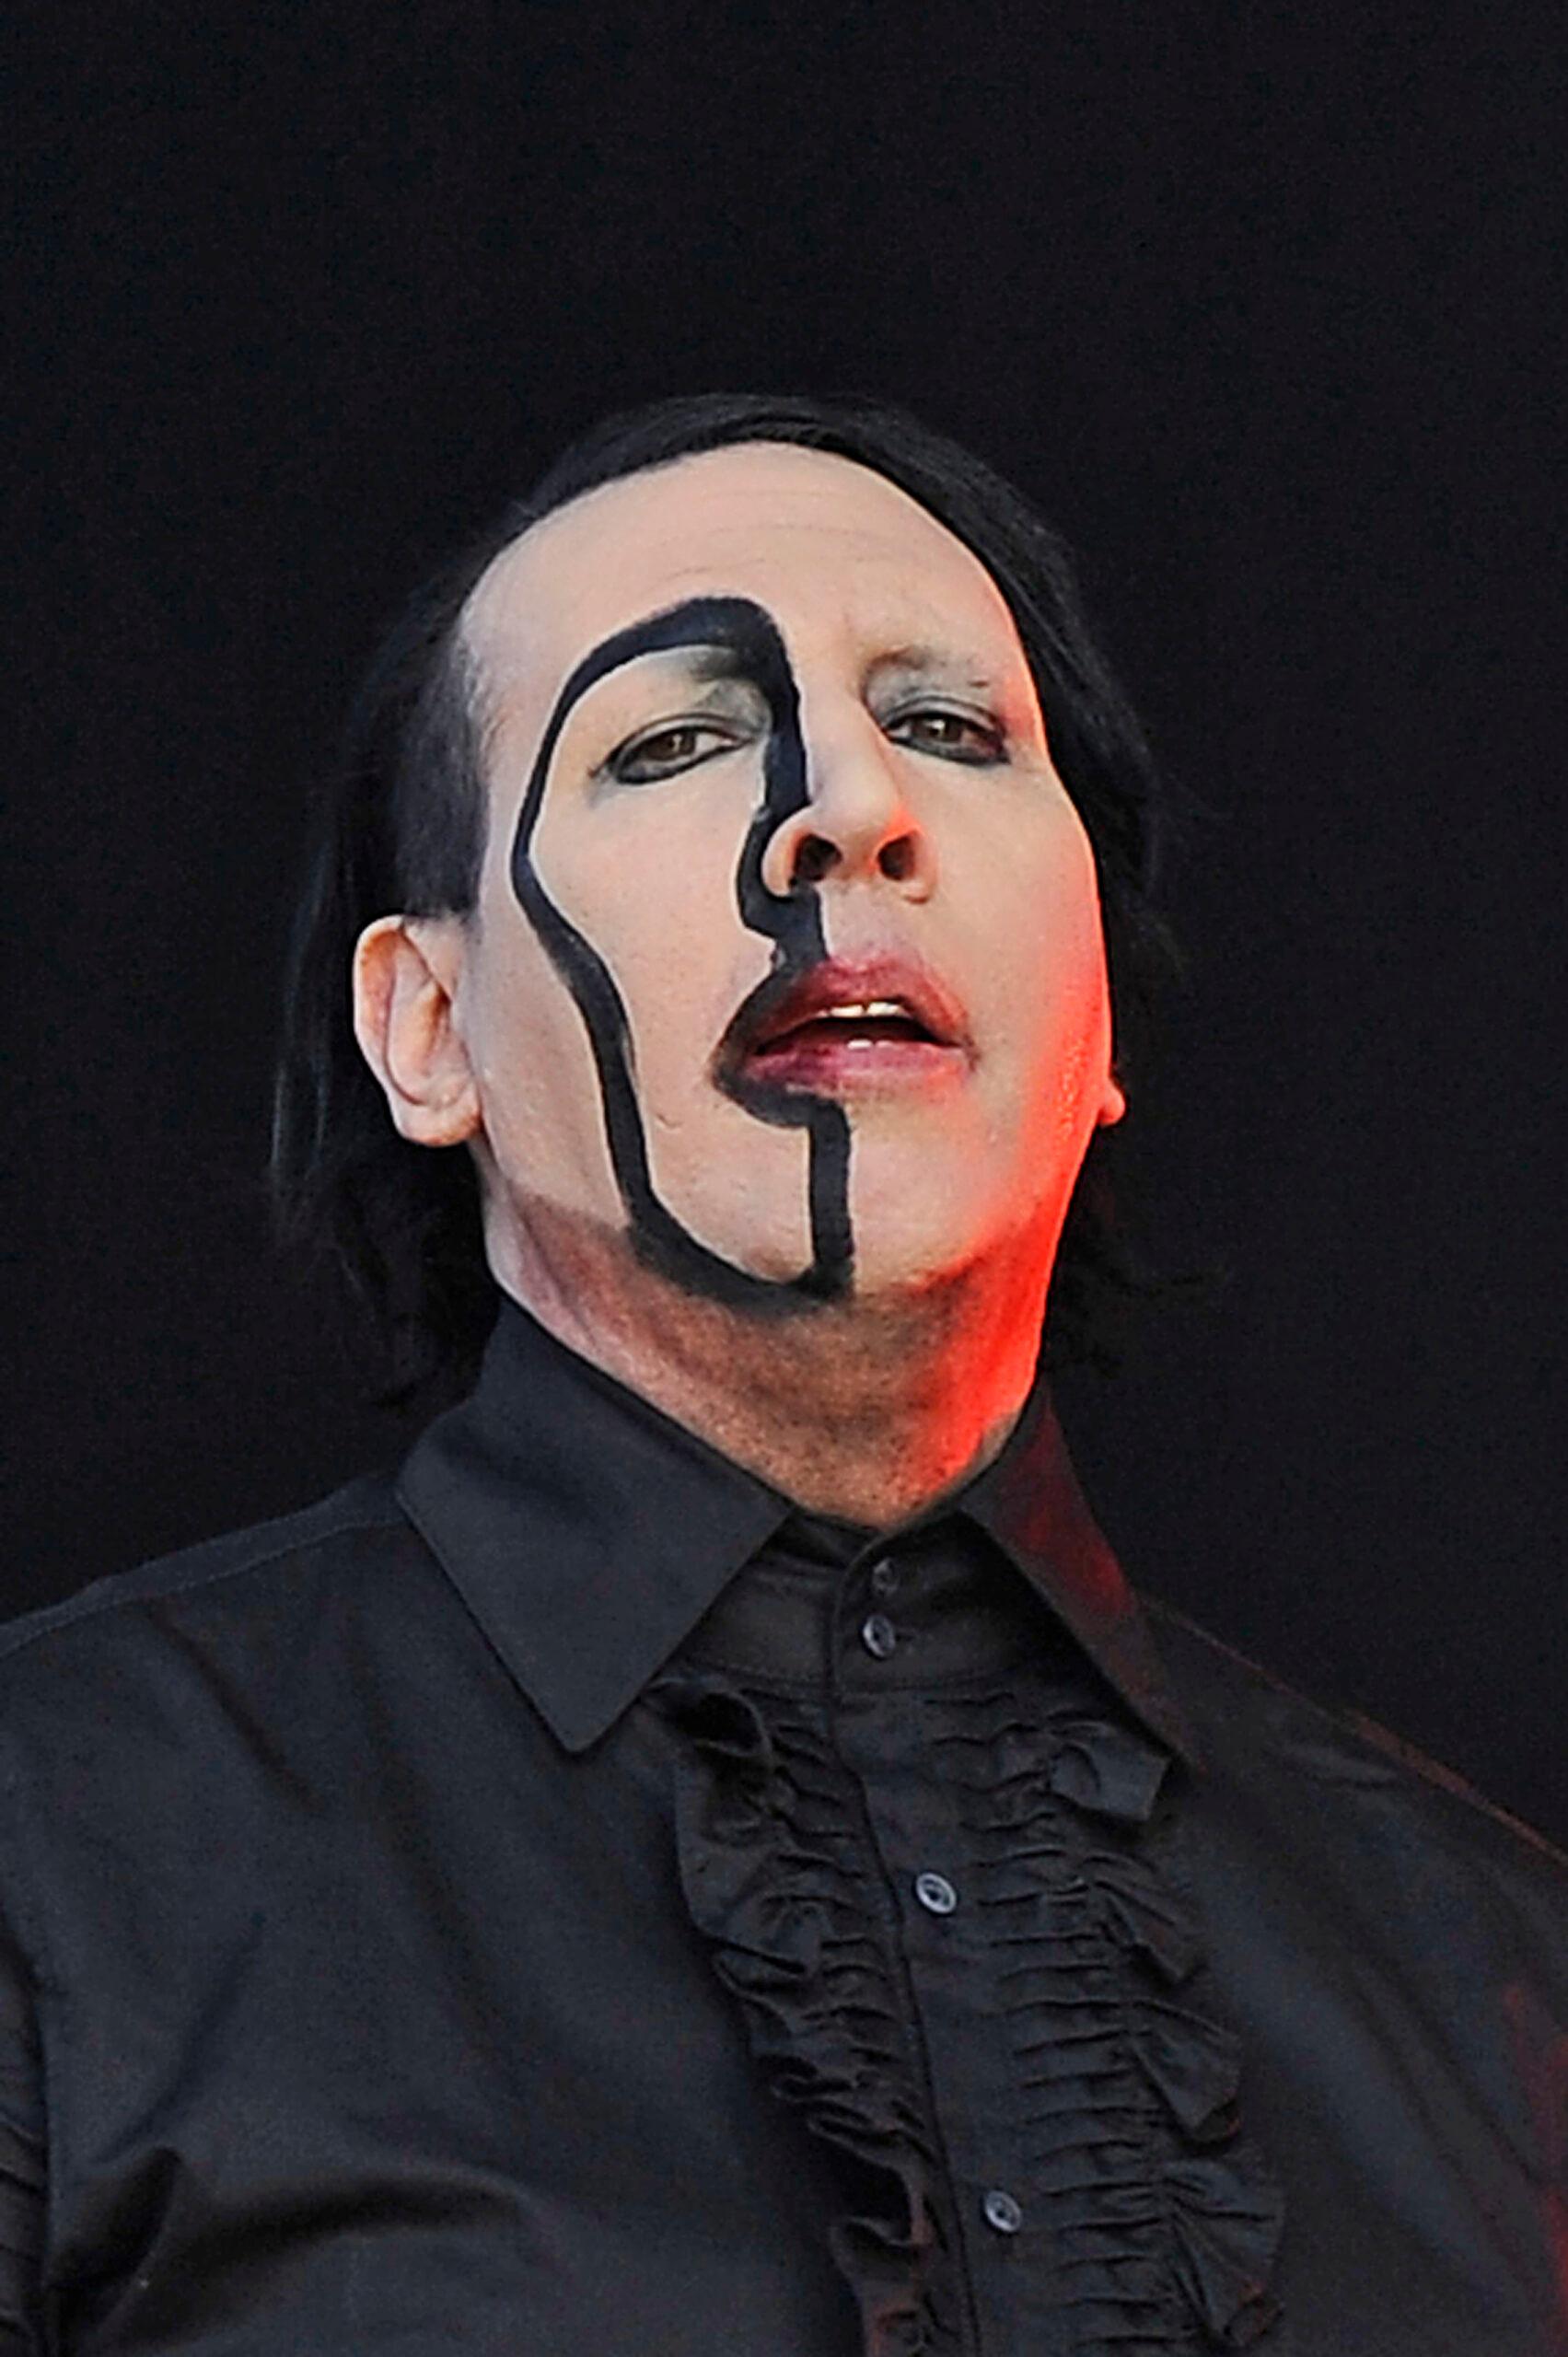 Marilyn Manson performing at Download Festival